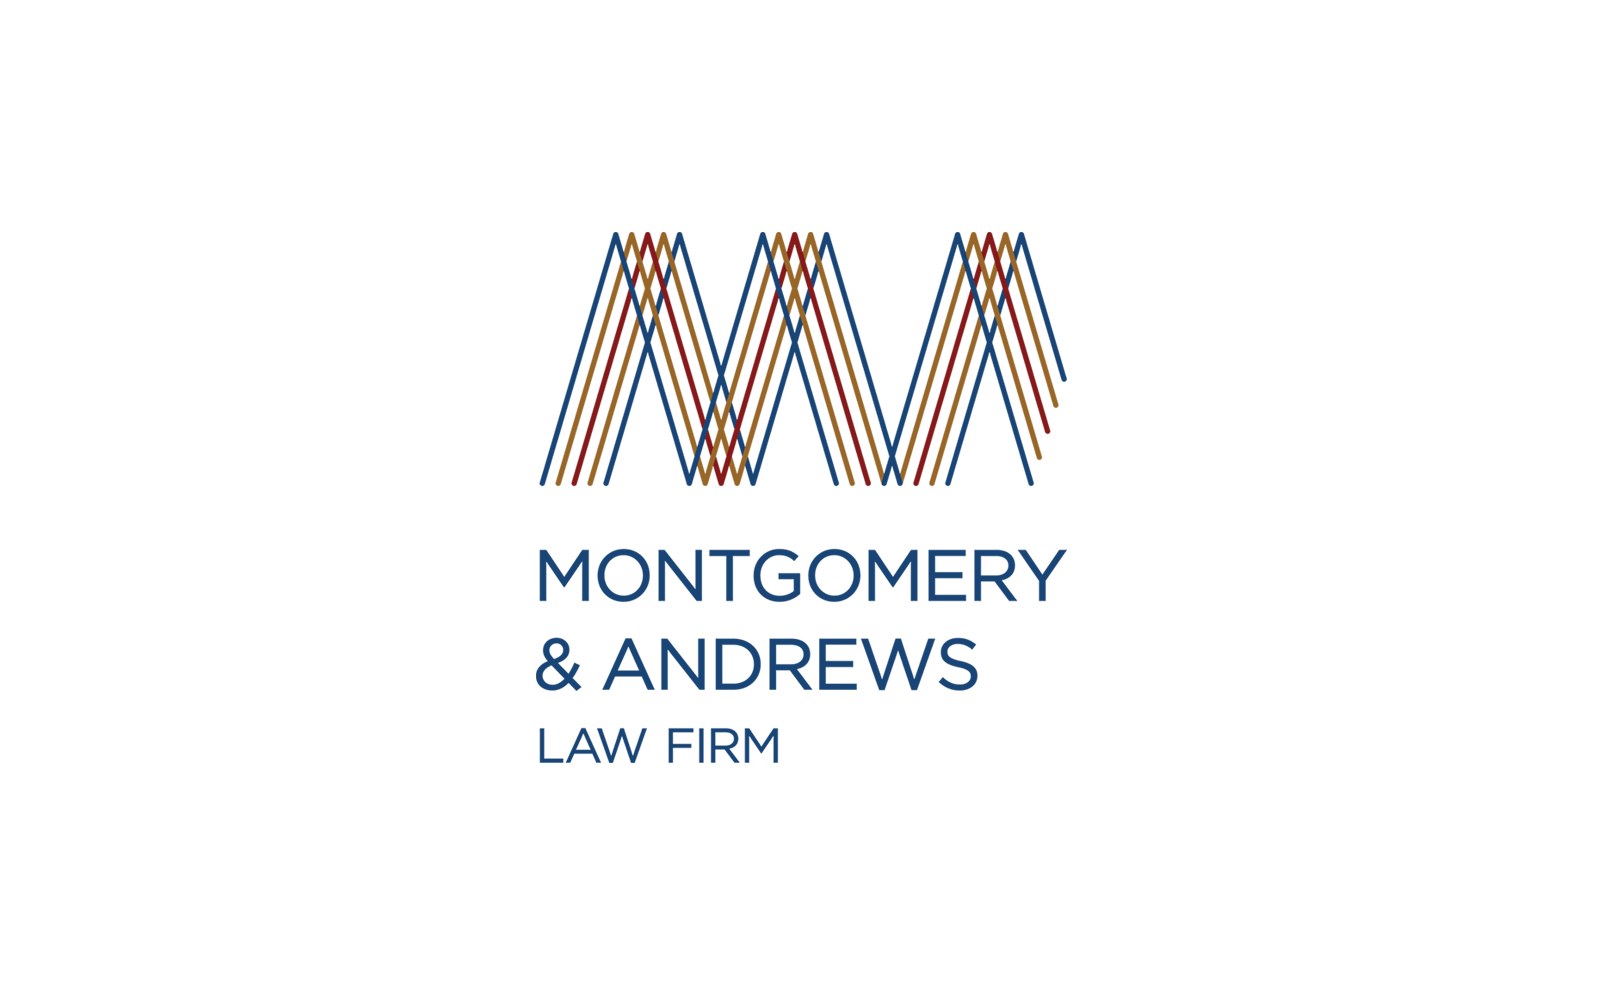 Continuation Logo - Montgomery & Andrews Law Firm Logo - Rinse Design